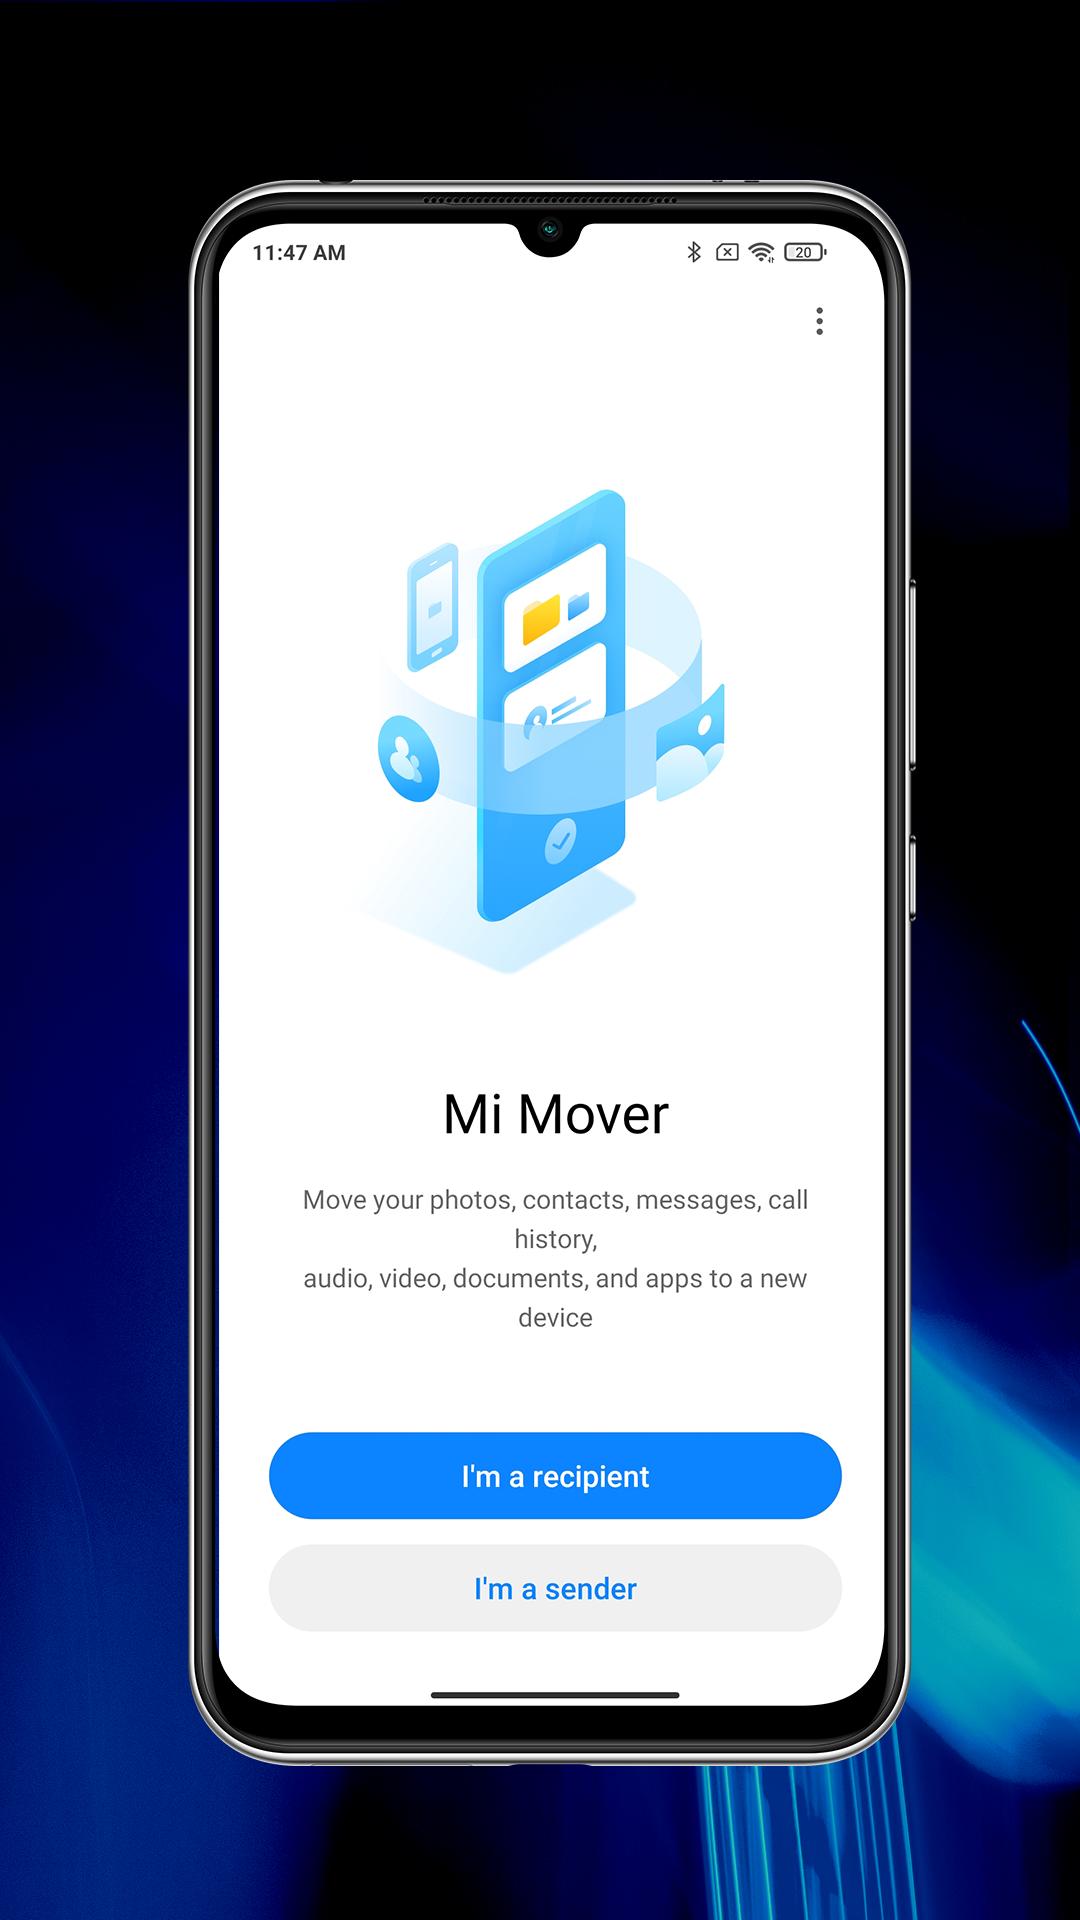 Tải Xuống Apk Mi Mover Cho Android